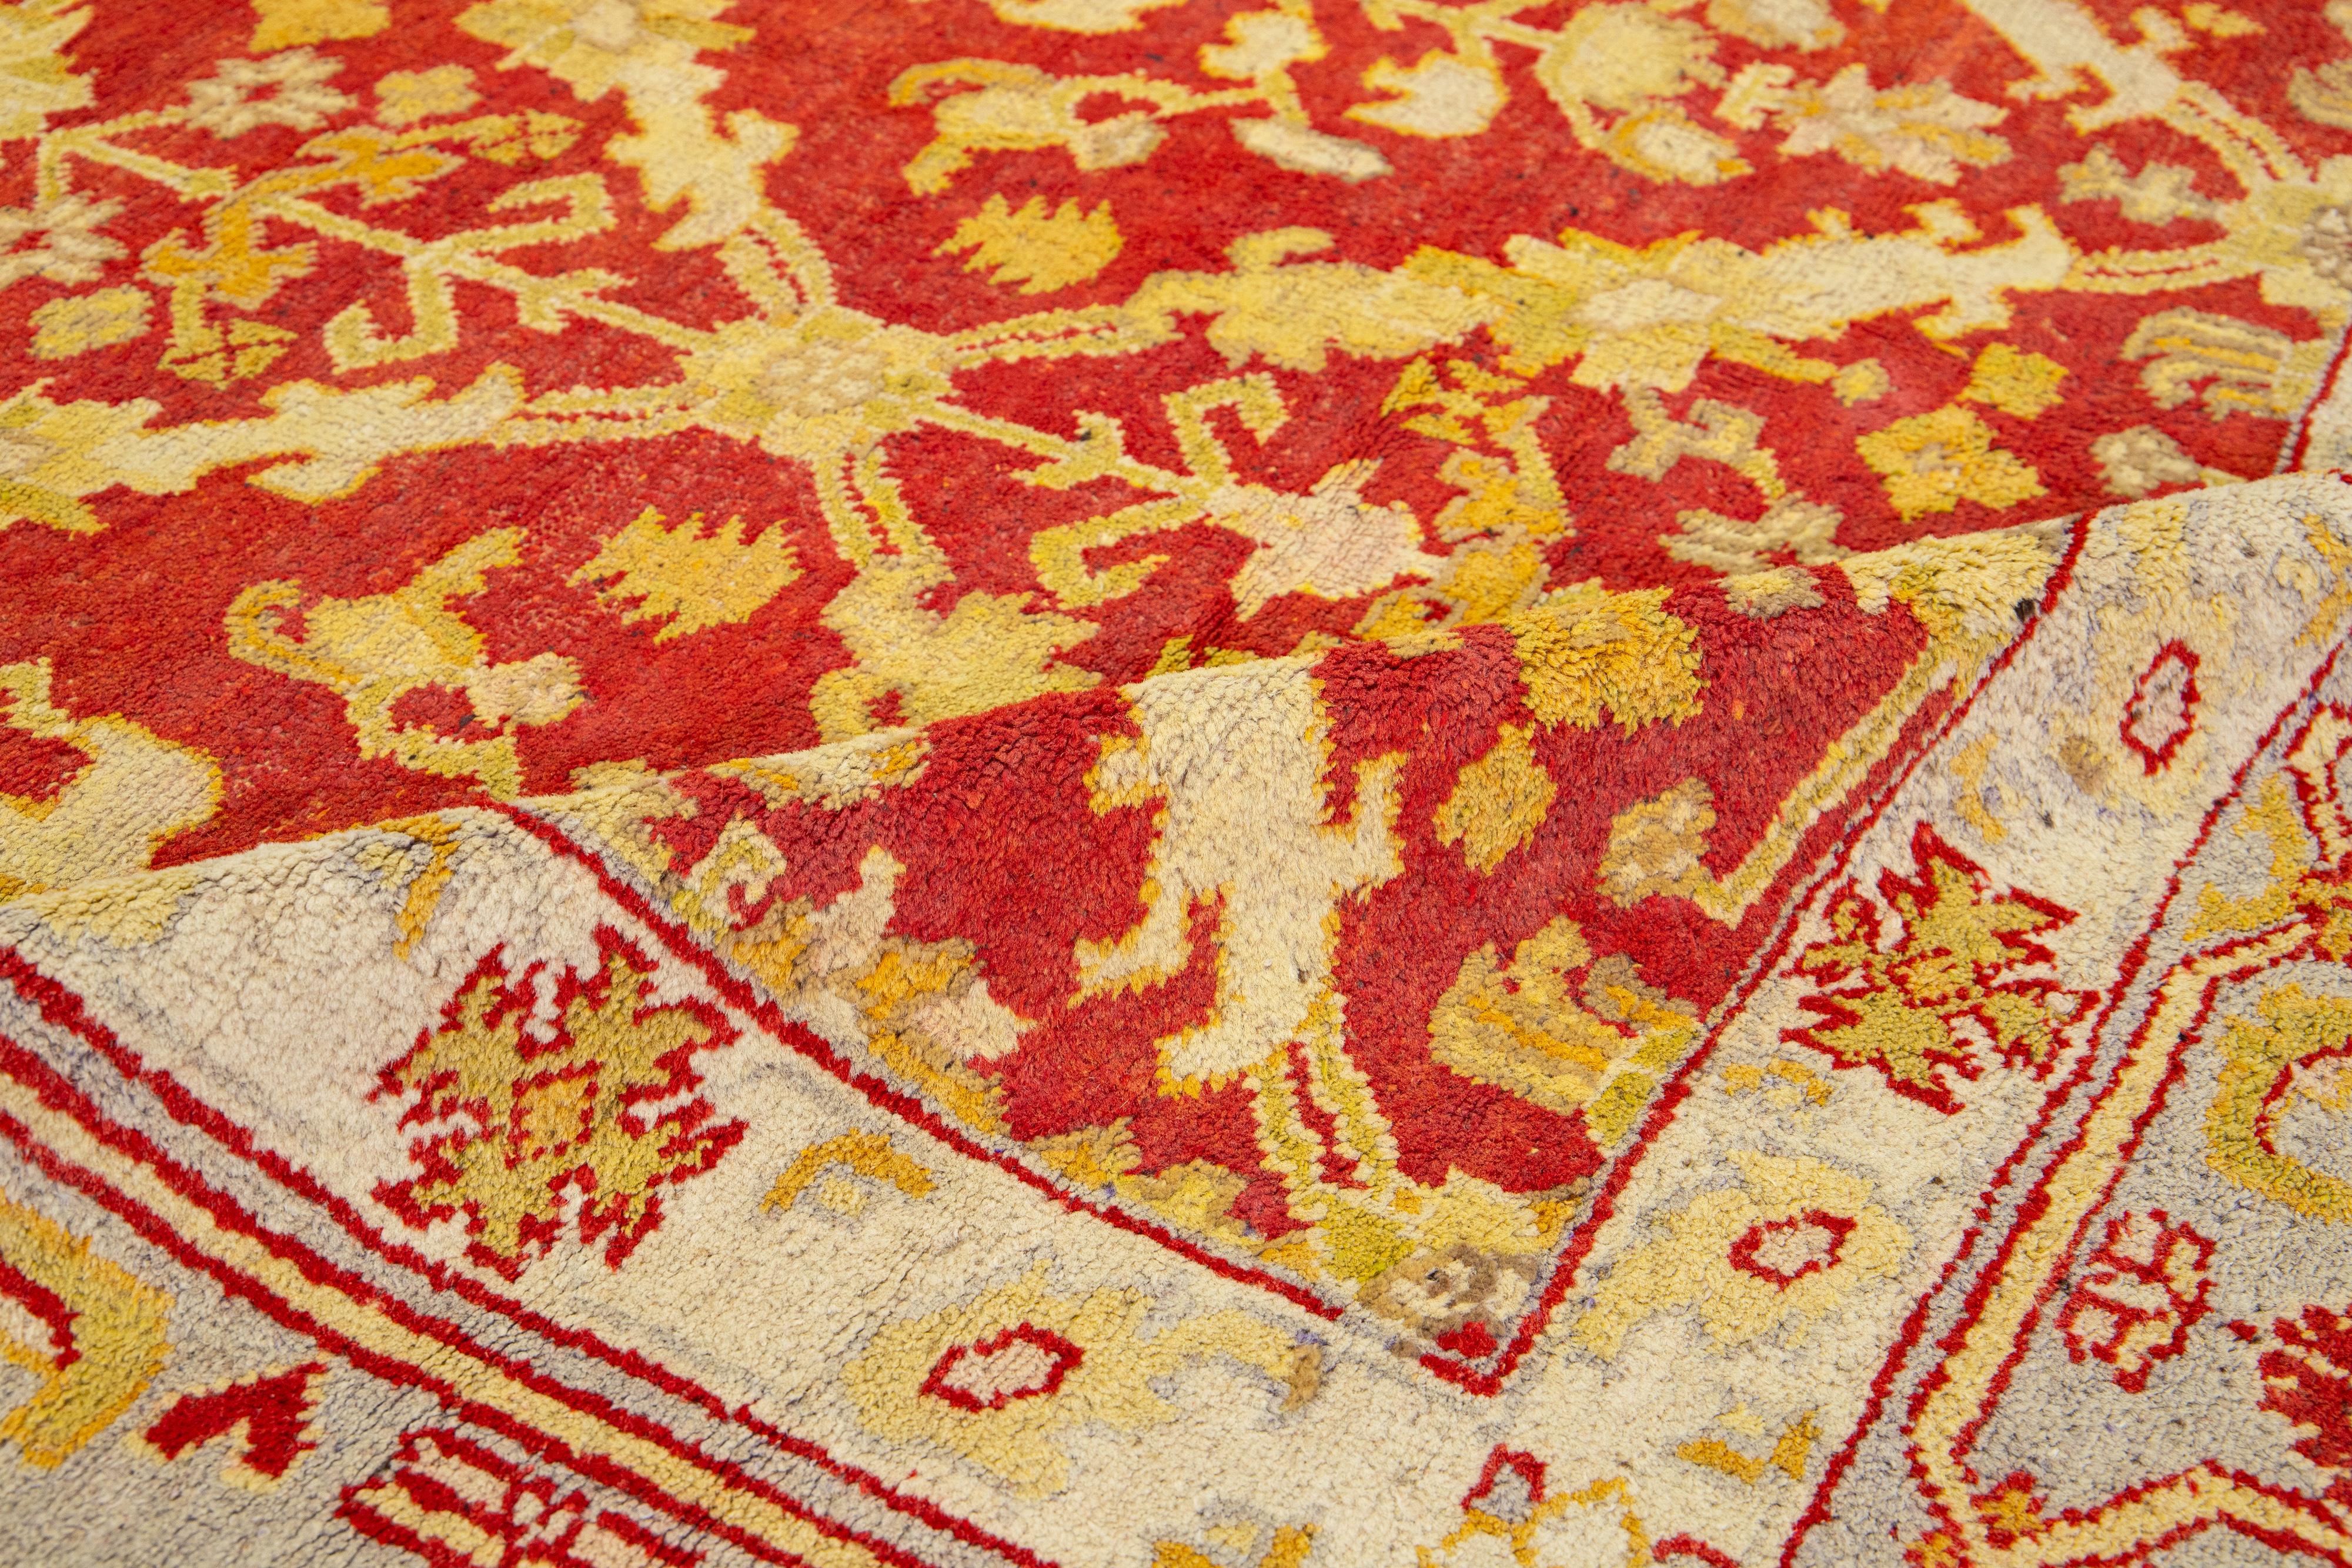 Handmade Red Turkish Oushak Wool Rug Featuring a Floral Pattern From The 1880's For Sale 4